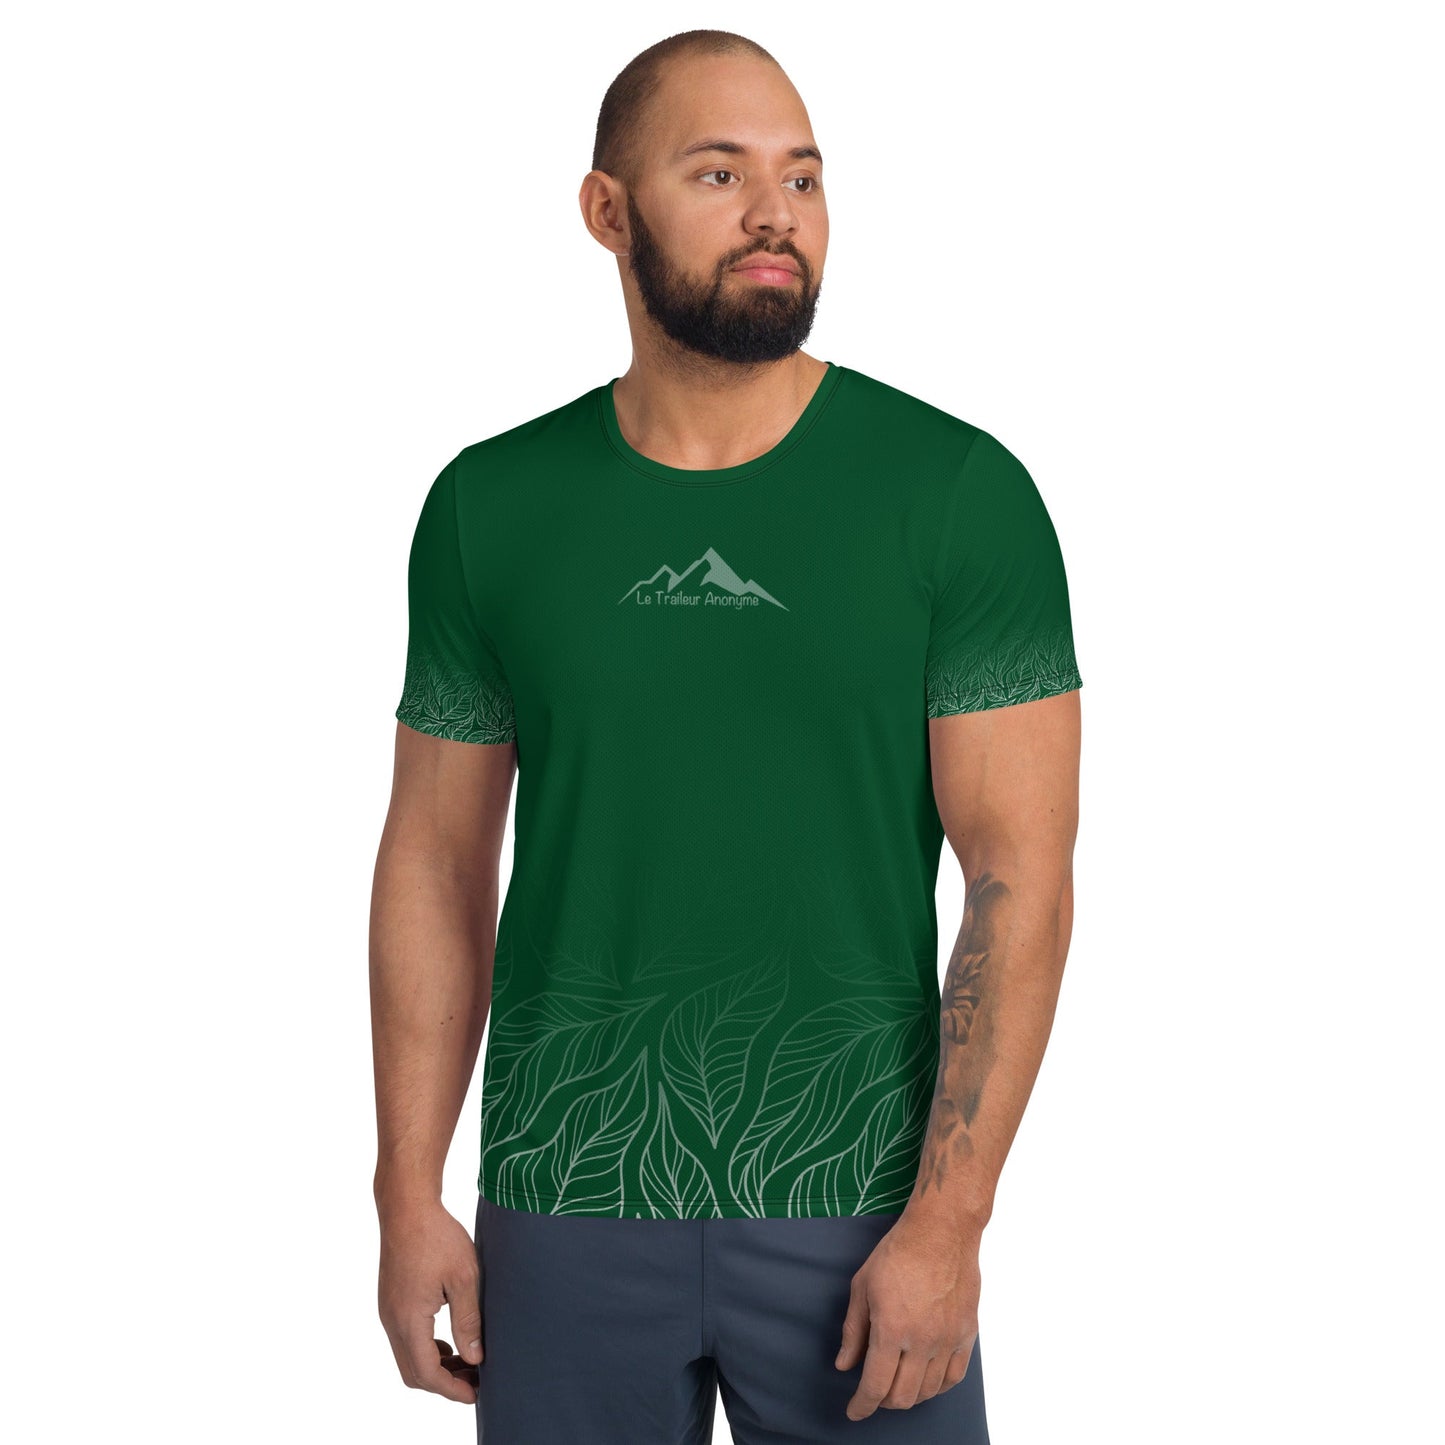 T-Shirt Running Homme - Green Forest - Le Traileur Anonyme